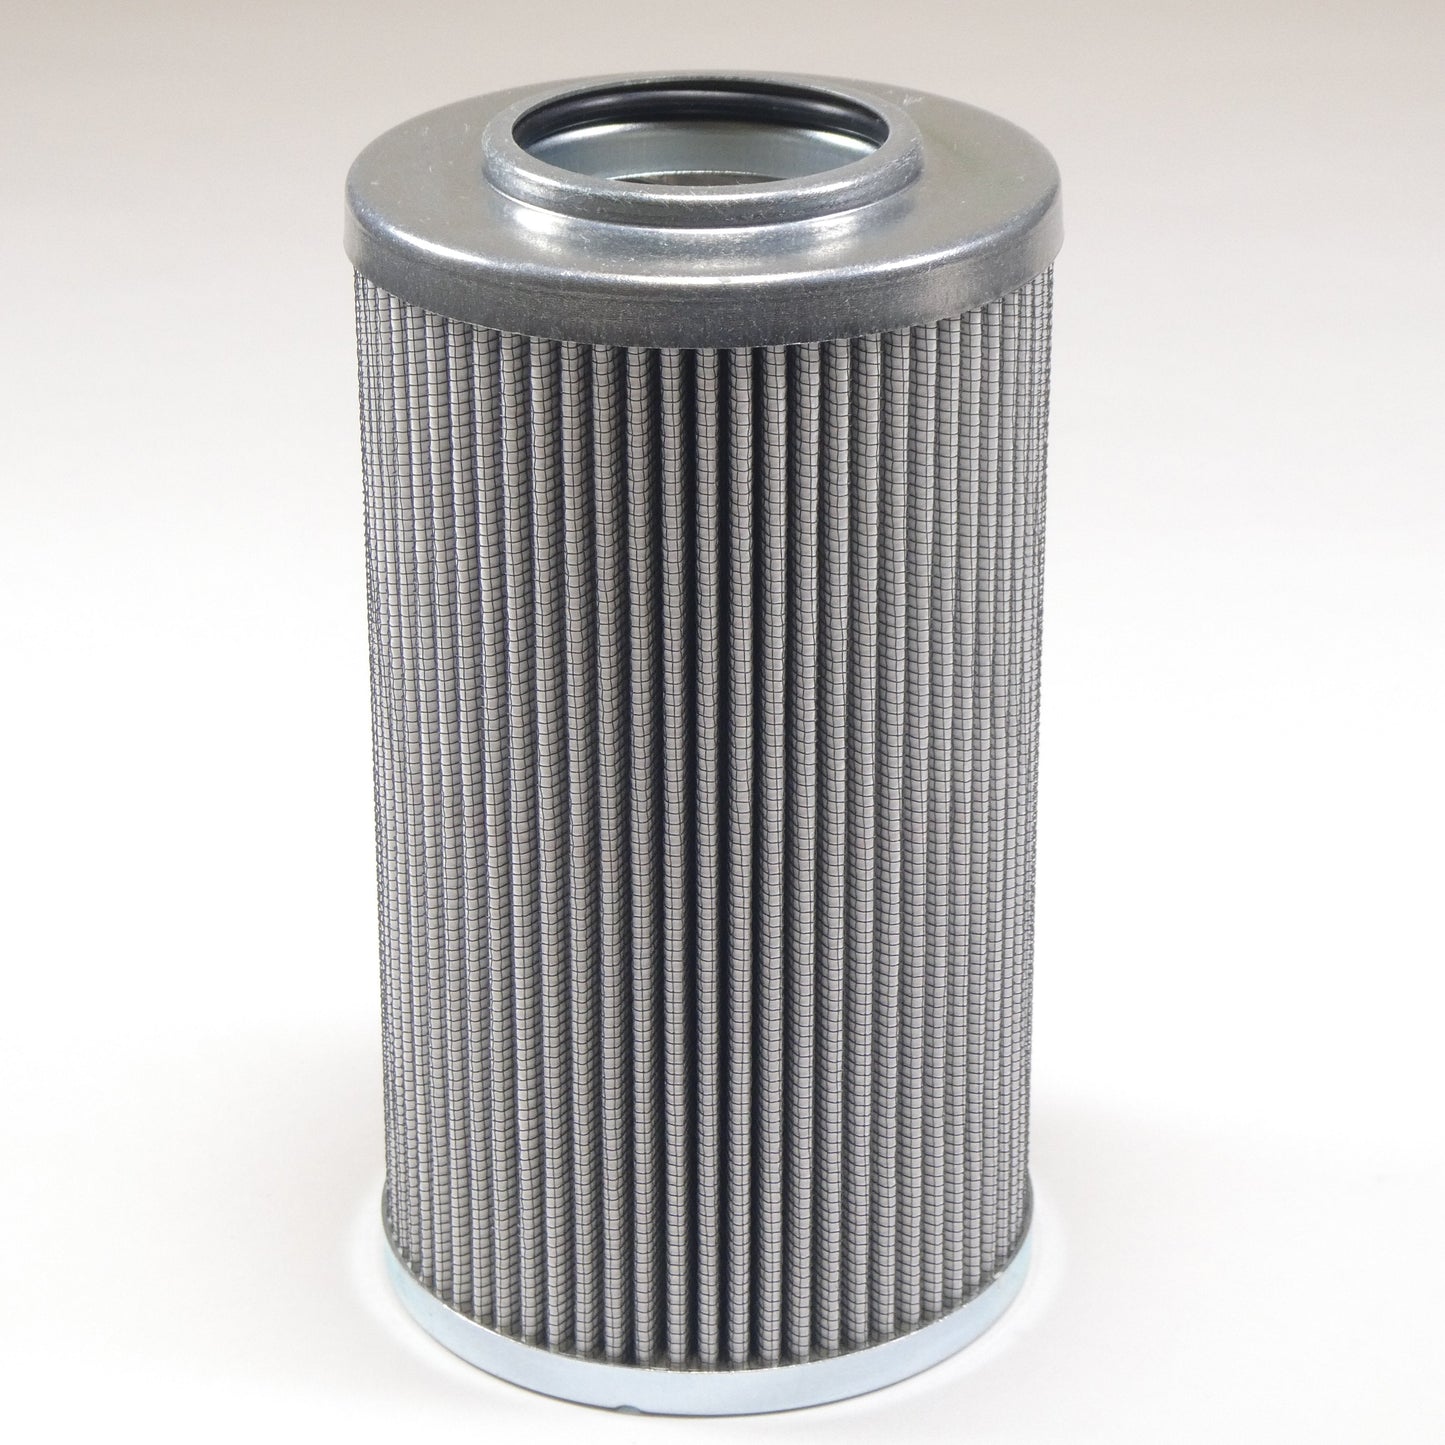 Hydrafil Replacement Filter Element for Hydac 0330D010ON/-S0263 for Skydrol, HyJet phosphate ester fluids.